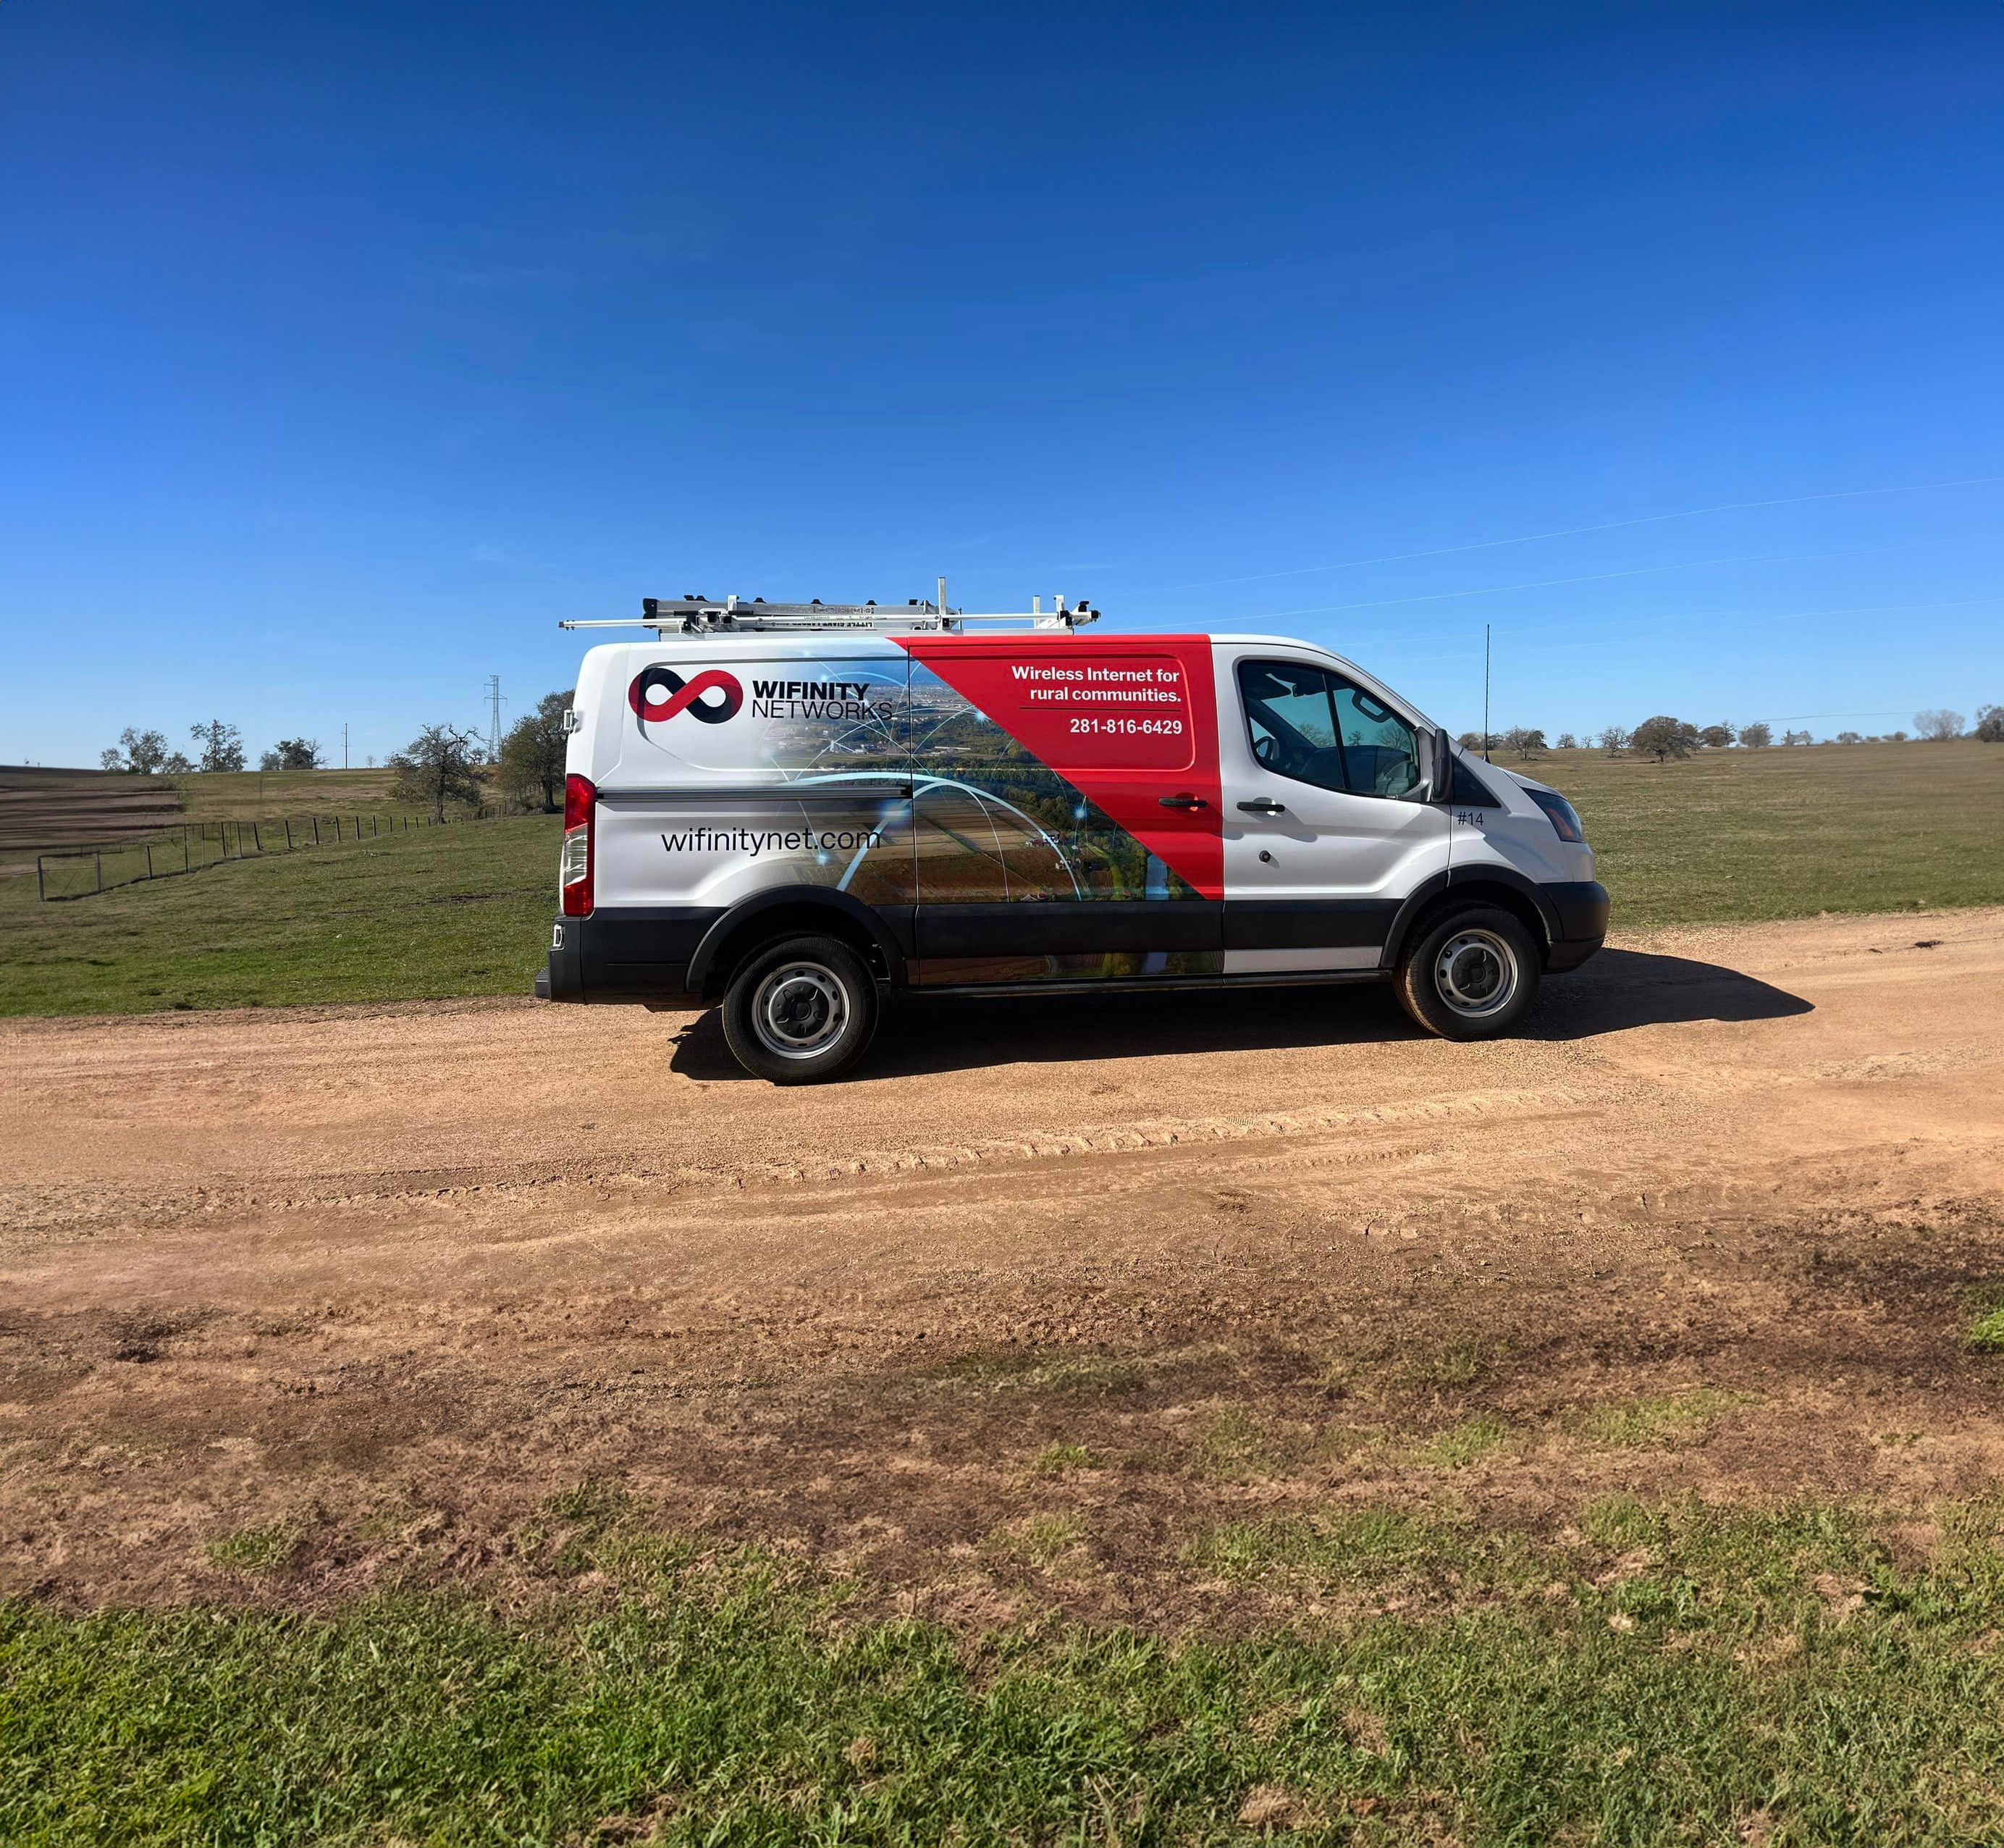 Picture of company van in a rural area